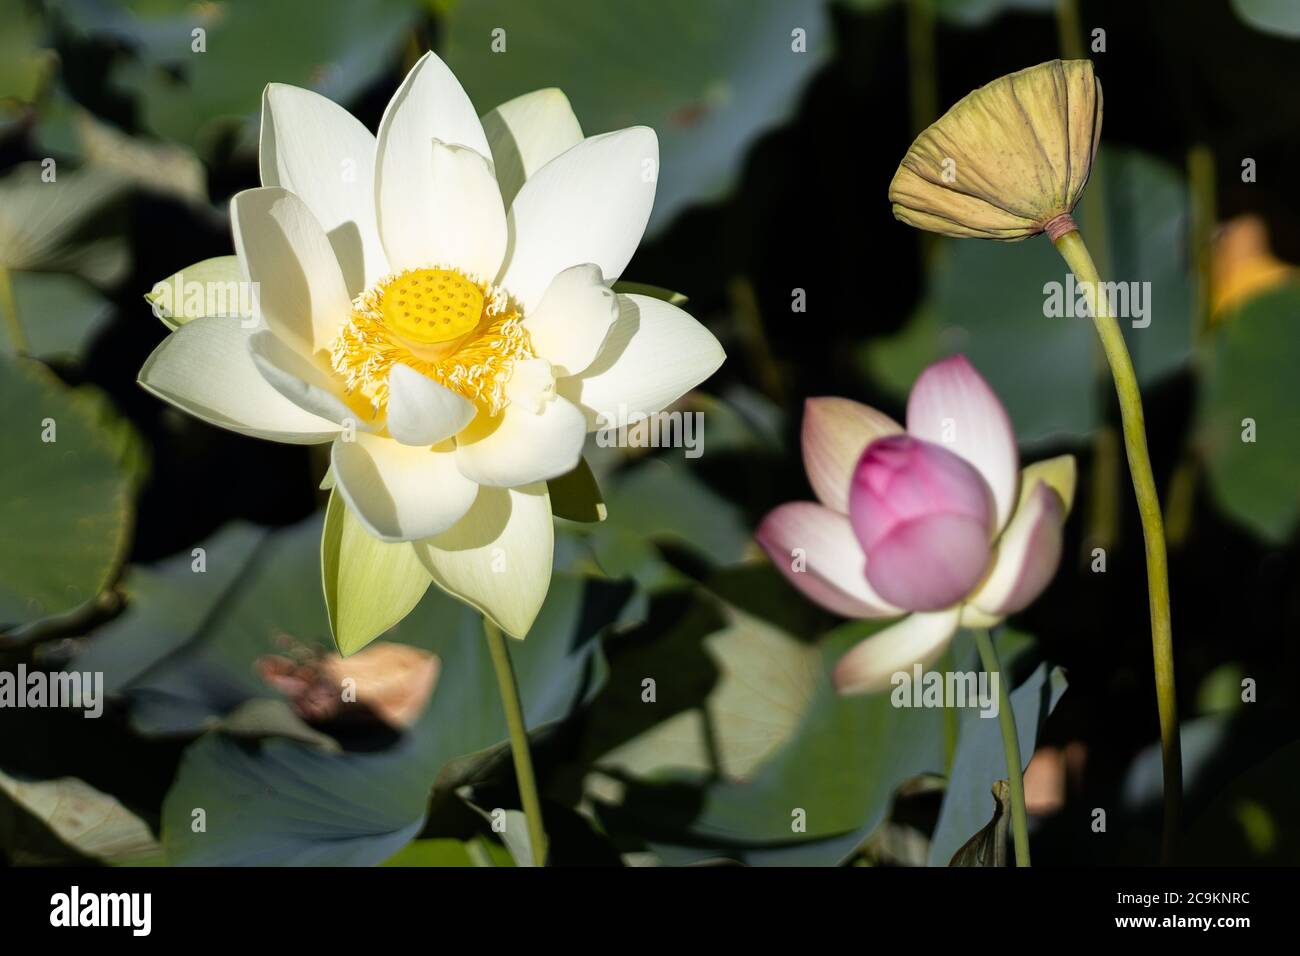 A trio of water lotus blossoms at Echo Park Lake in Los Angeles, California showing all three stages of maturity from bud to blossom to seed pod. Stock Photo